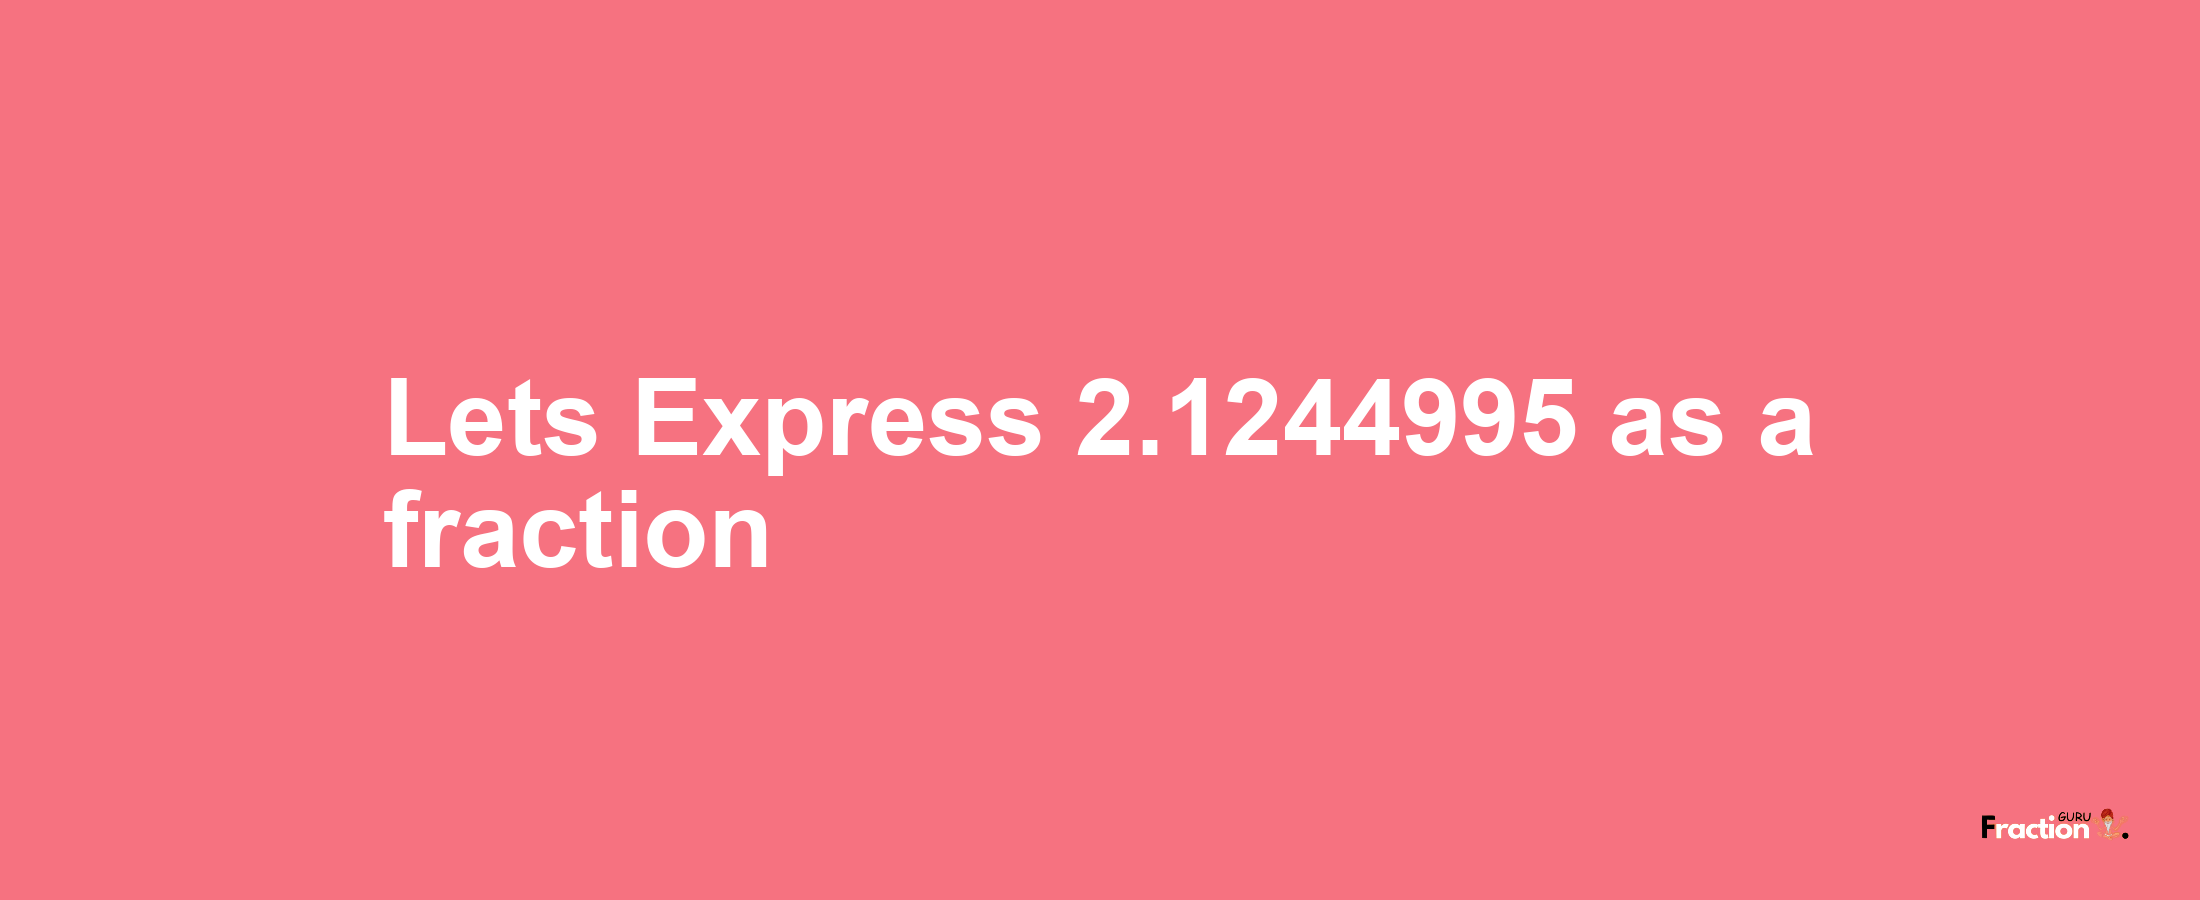 Lets Express 2.1244995 as afraction